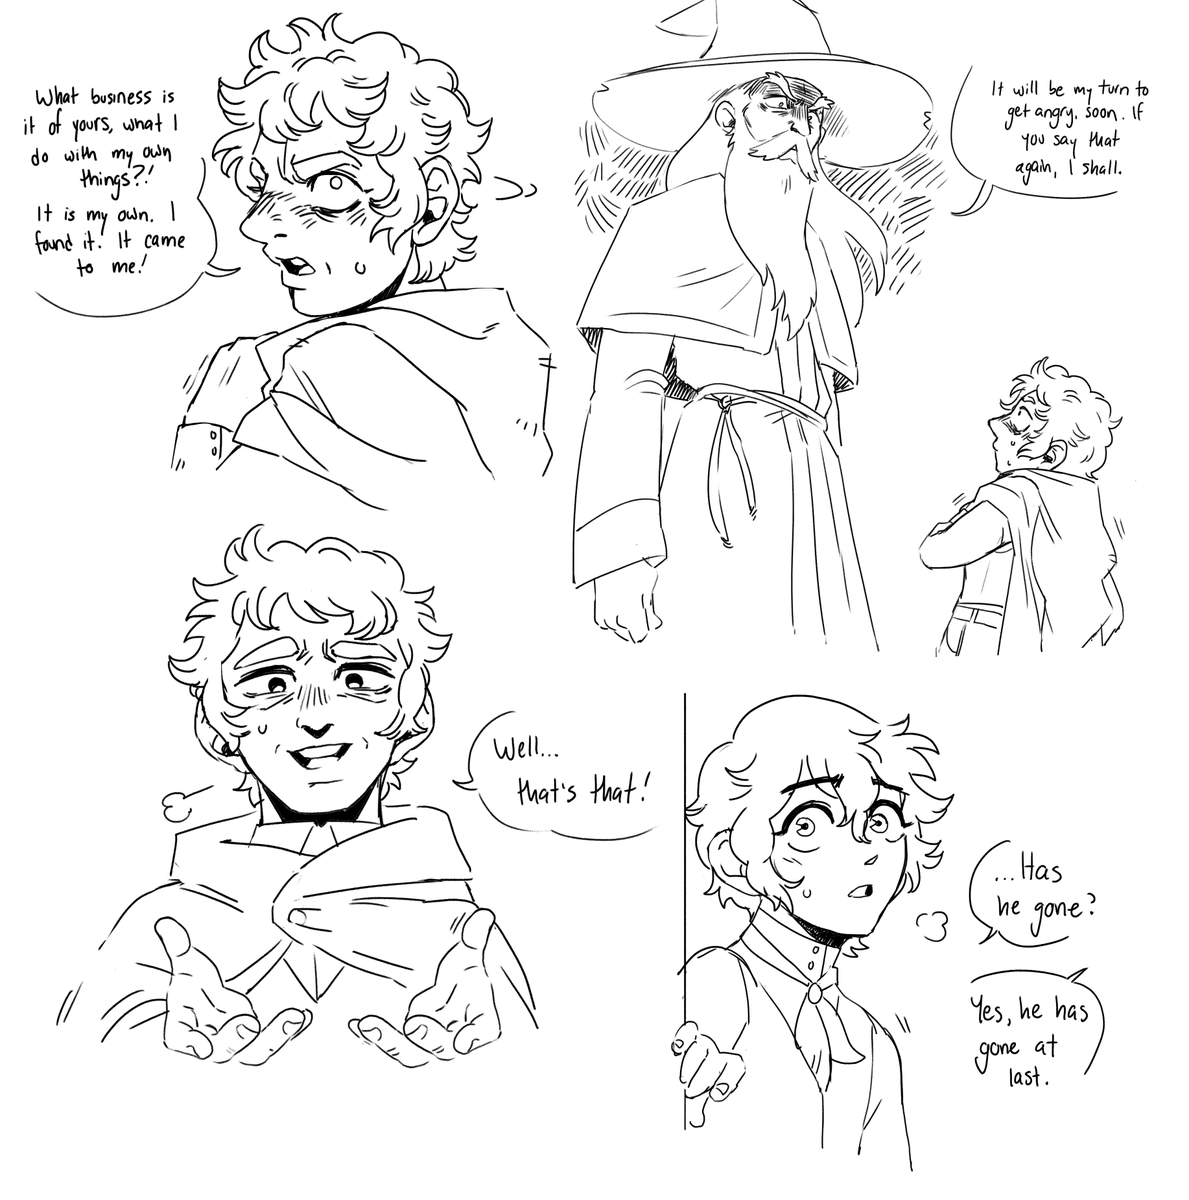 started reading the fellowship of the ring the other night. the first chapter made me sad after reading the hobbit so here's some first chapter doodles. i will draw more tho, i really like my frodo design, he's baby 🥹 